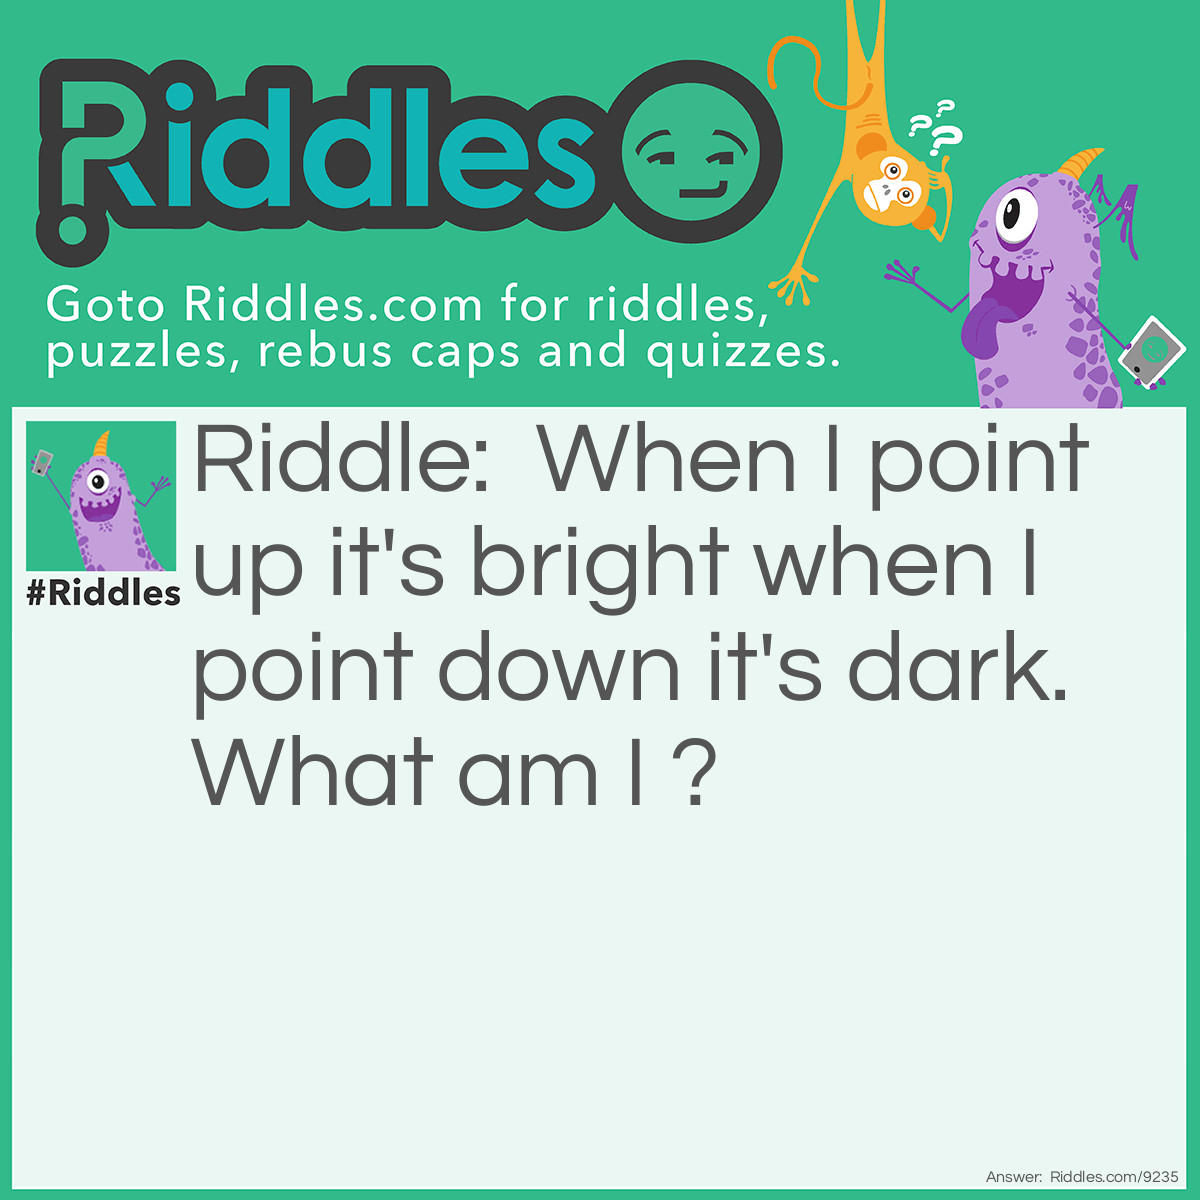 Riddle: When I point up it's bright when I point down it's dark. What am I ? Answer: A light switch.